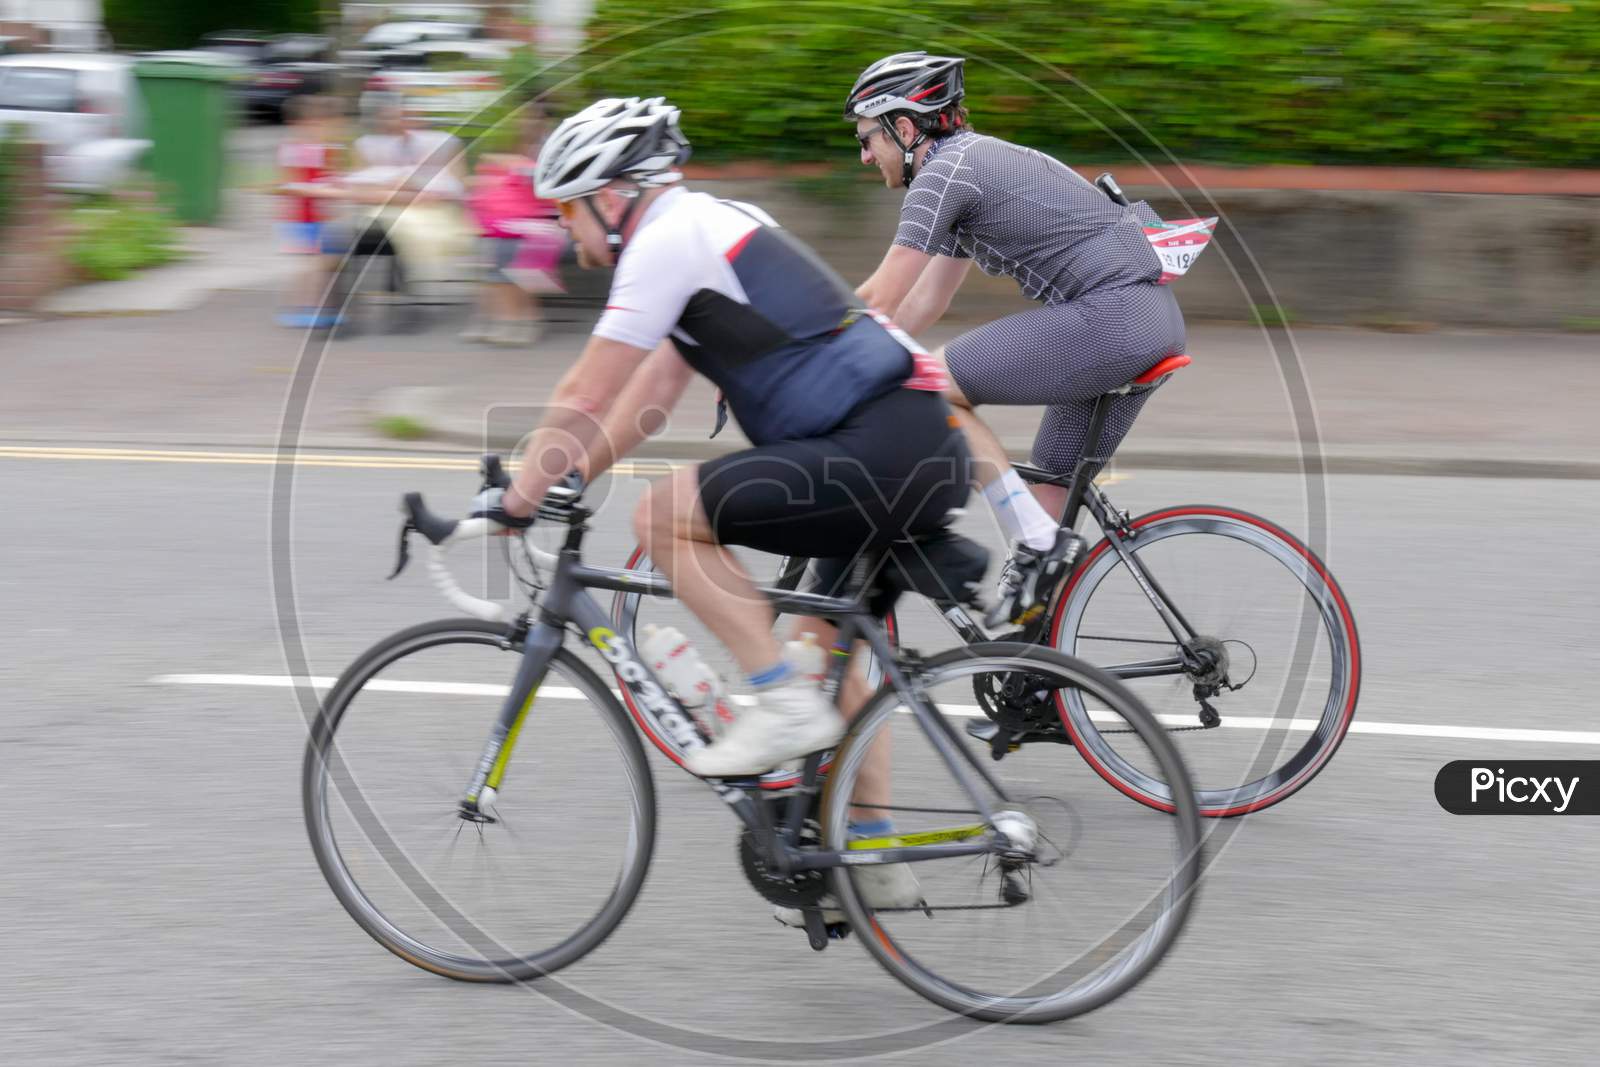 Cyclists Participating In The Velothon Cycling Event In Cardiff Wales On June 14, 2015